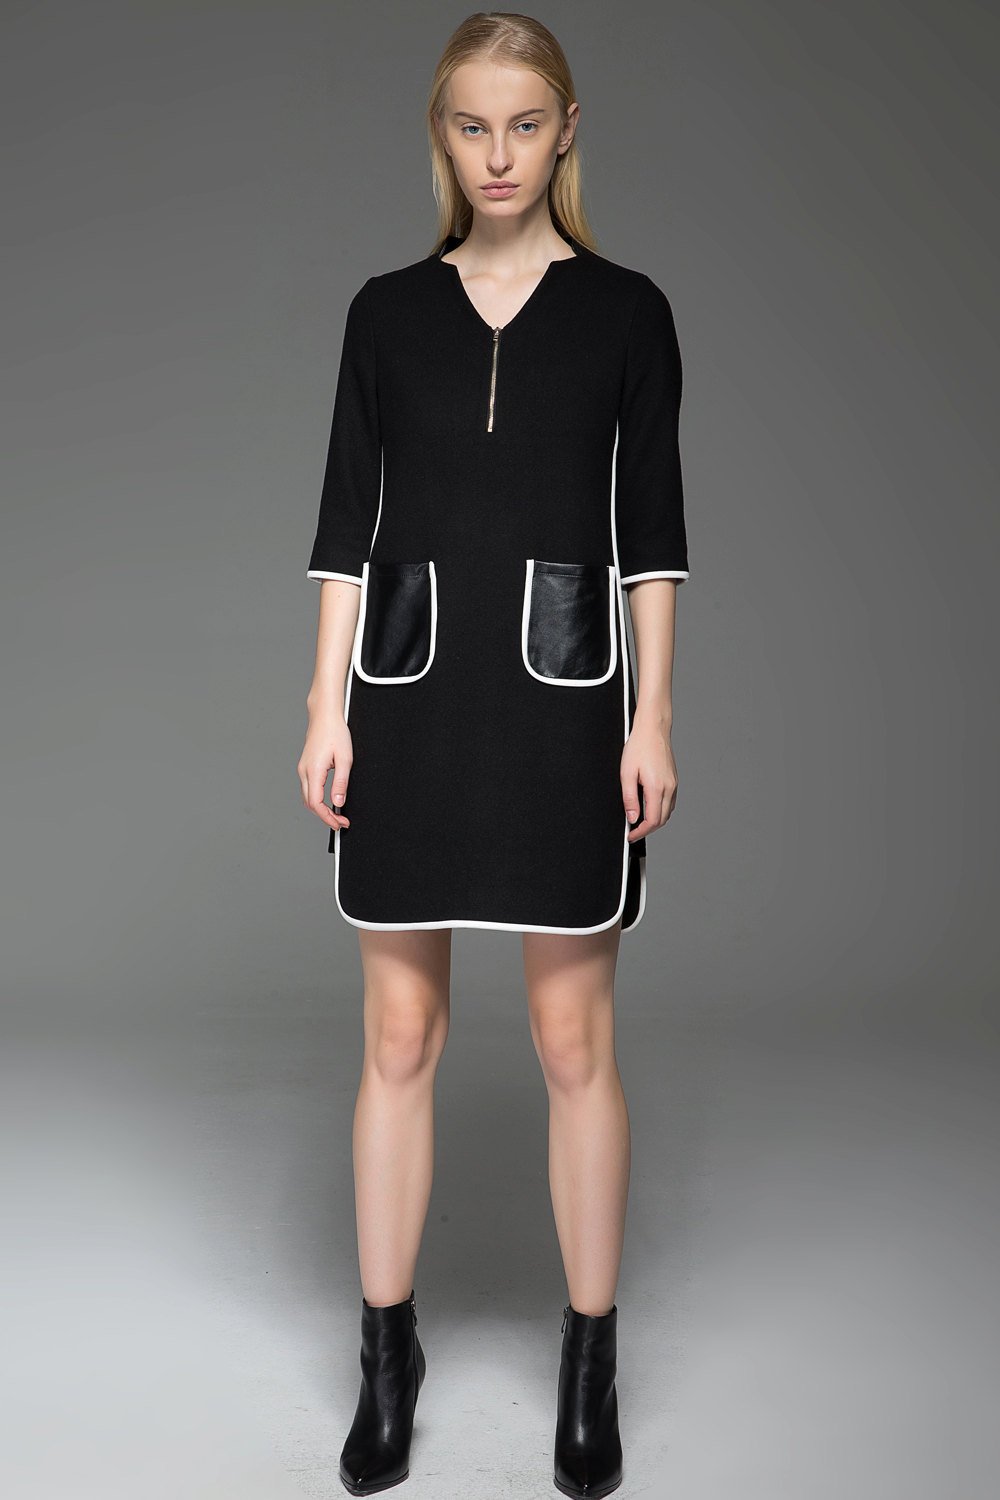 Chanel Style Dress - Black Wool Mini Dress with Cream Piping and Leath –  Ylistyle